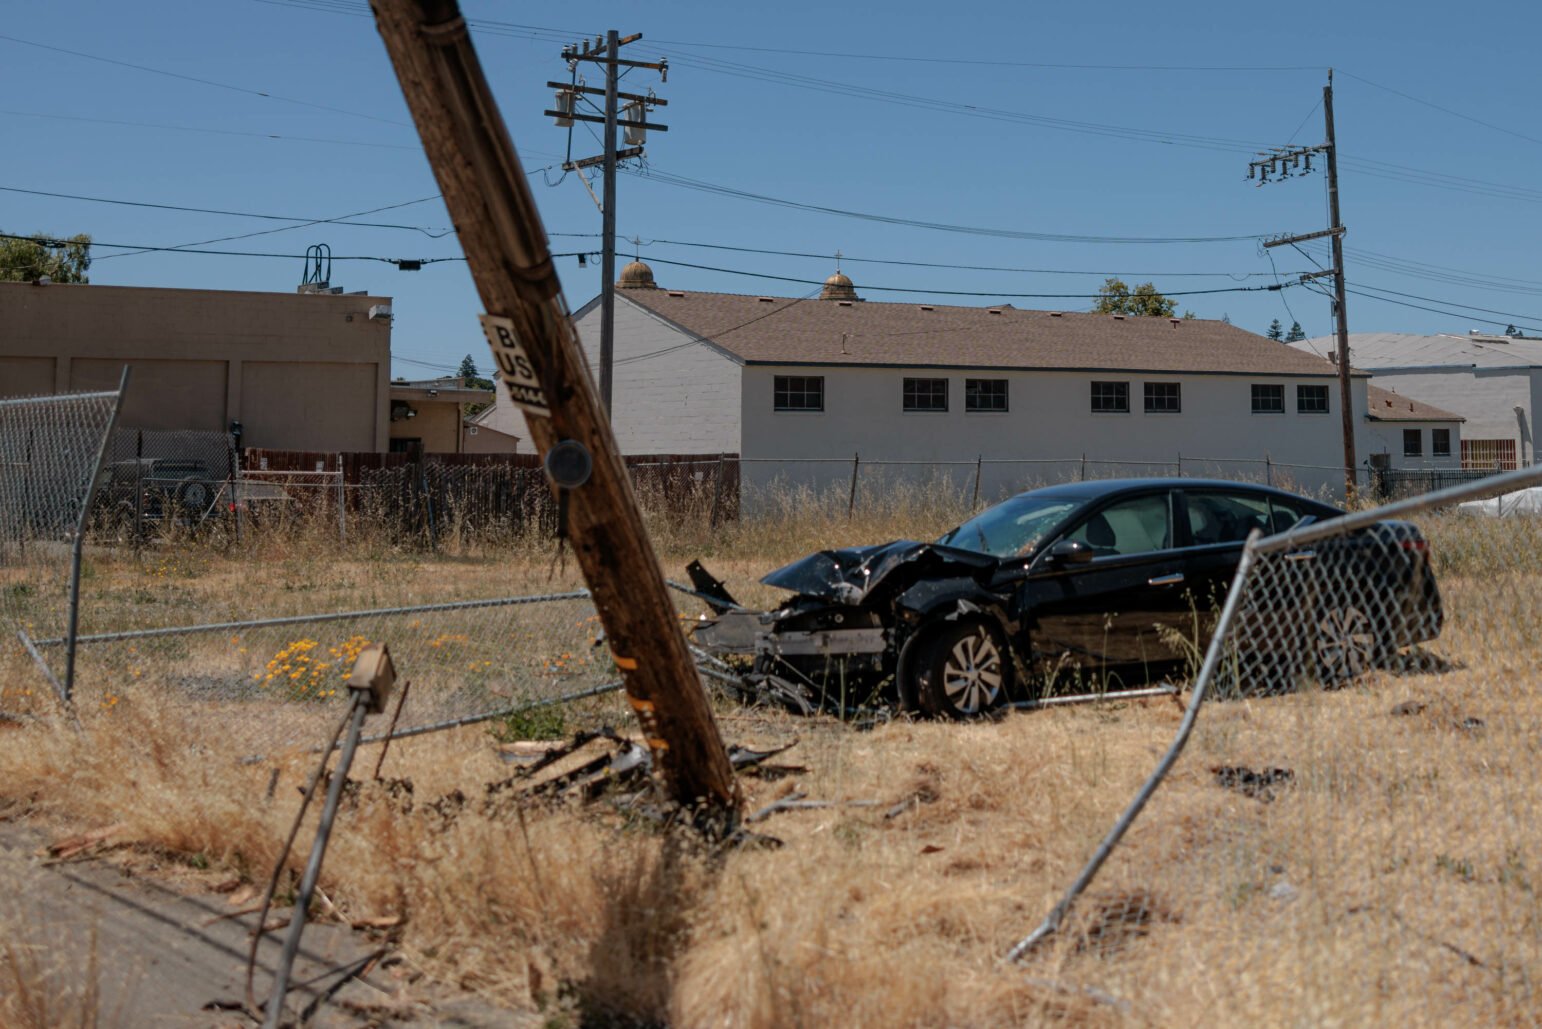 A car accident scene under a clear blue sky. A black sedan with significant front-end damage is situated off-road, having collided with a leaning wooden utility pole. Debris from the car and pole are scattered around the dry, grassy area, which is bordered by a chain-link fence. 